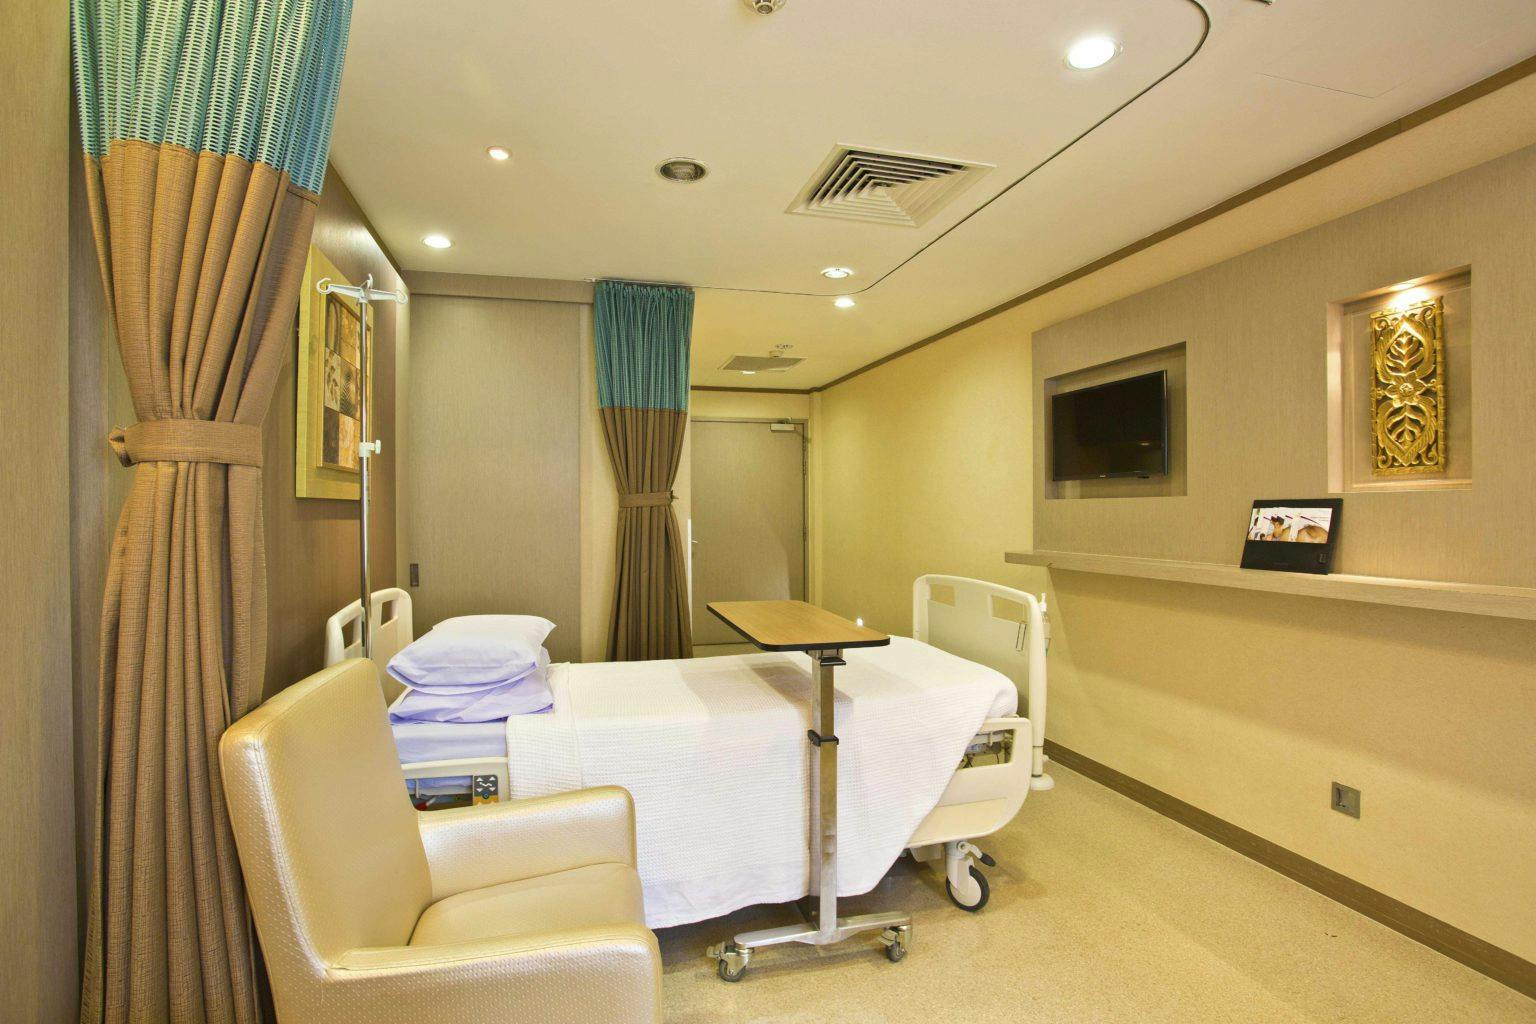 Thomson Medical Centre premier single room view from guest sofa